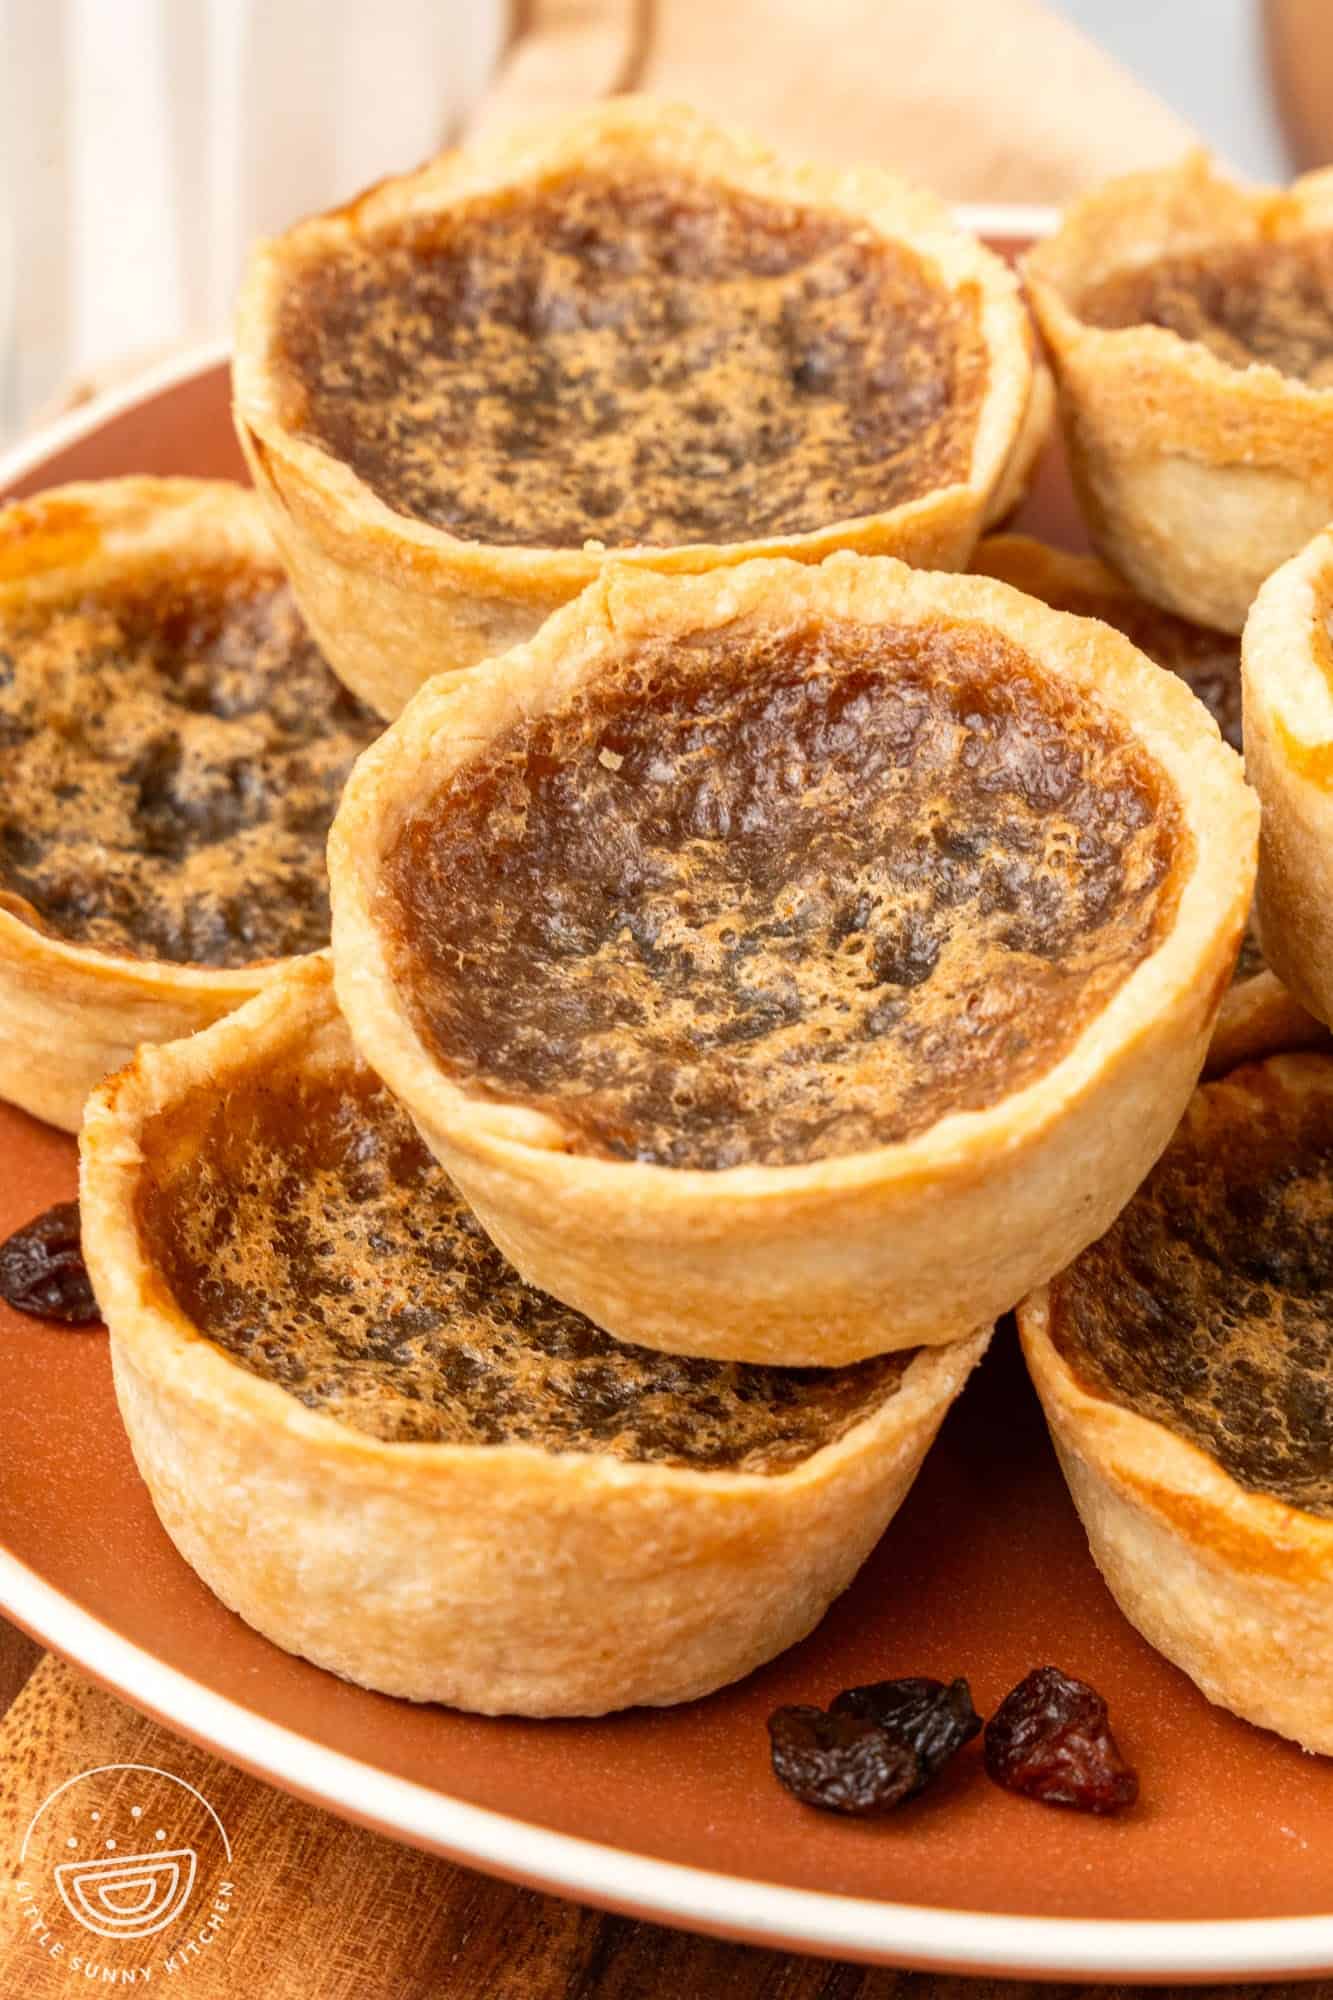 a plate of canadian butter tarts with raisins on the plate